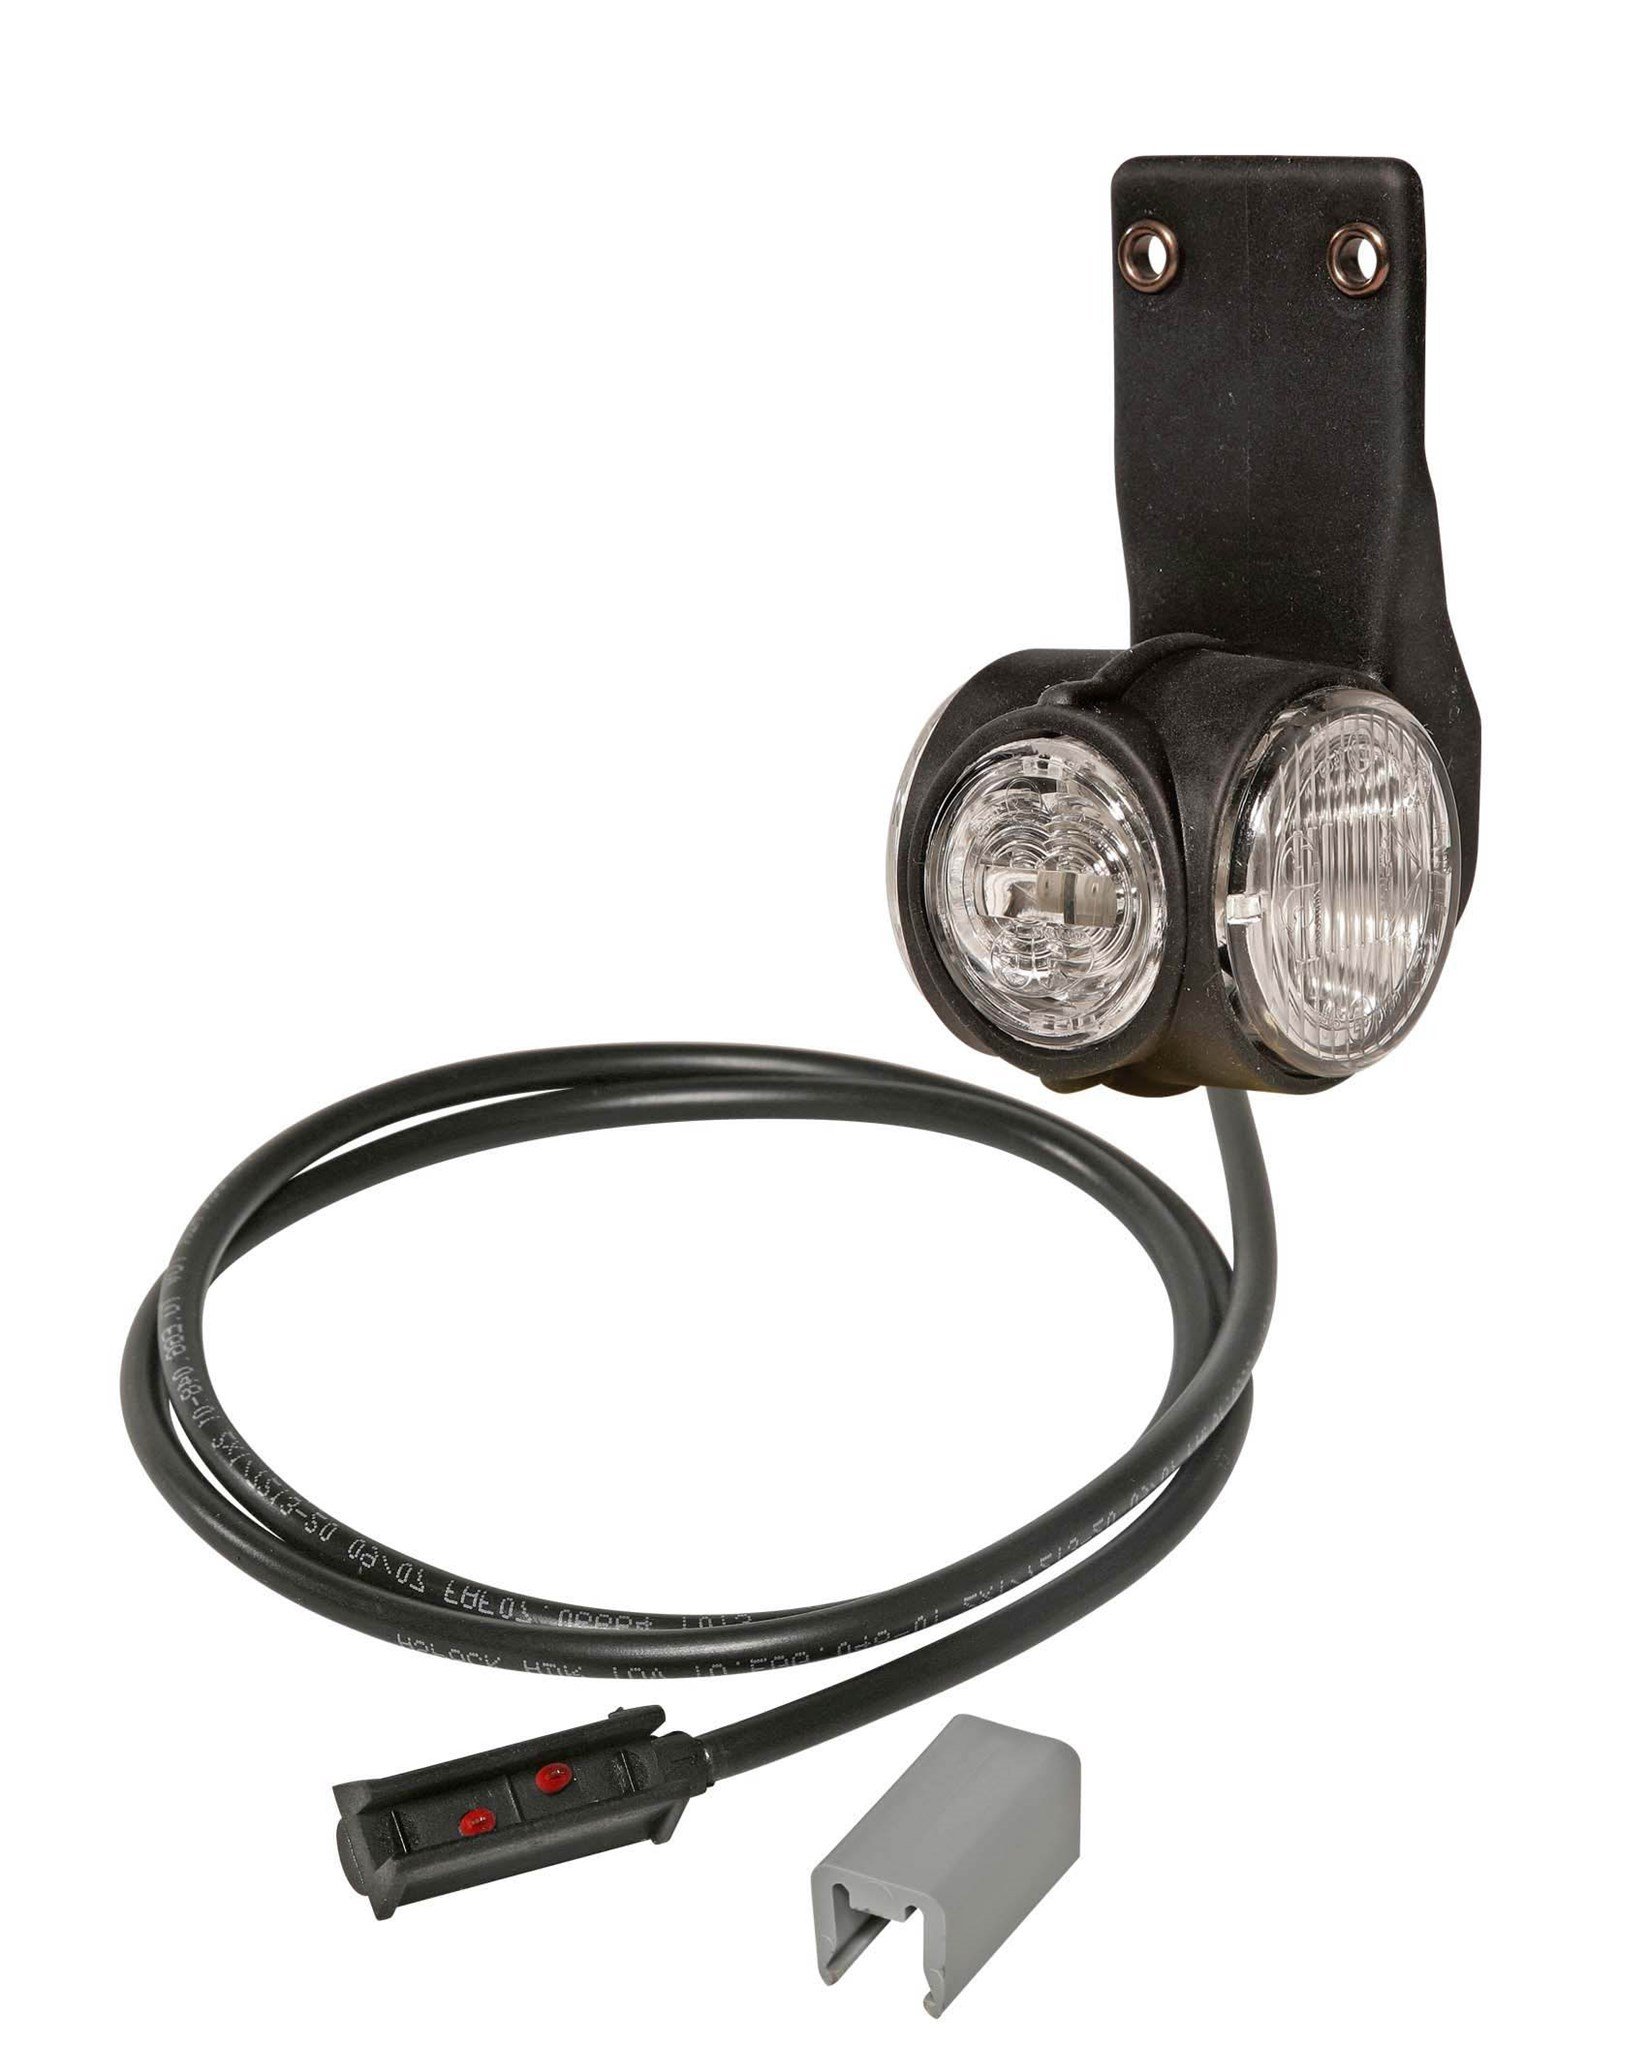 Immagine di 31-3364-054 Aspöck Superpoint III links, Pendelhalter P&R 1,5 m ro/we/or, LED